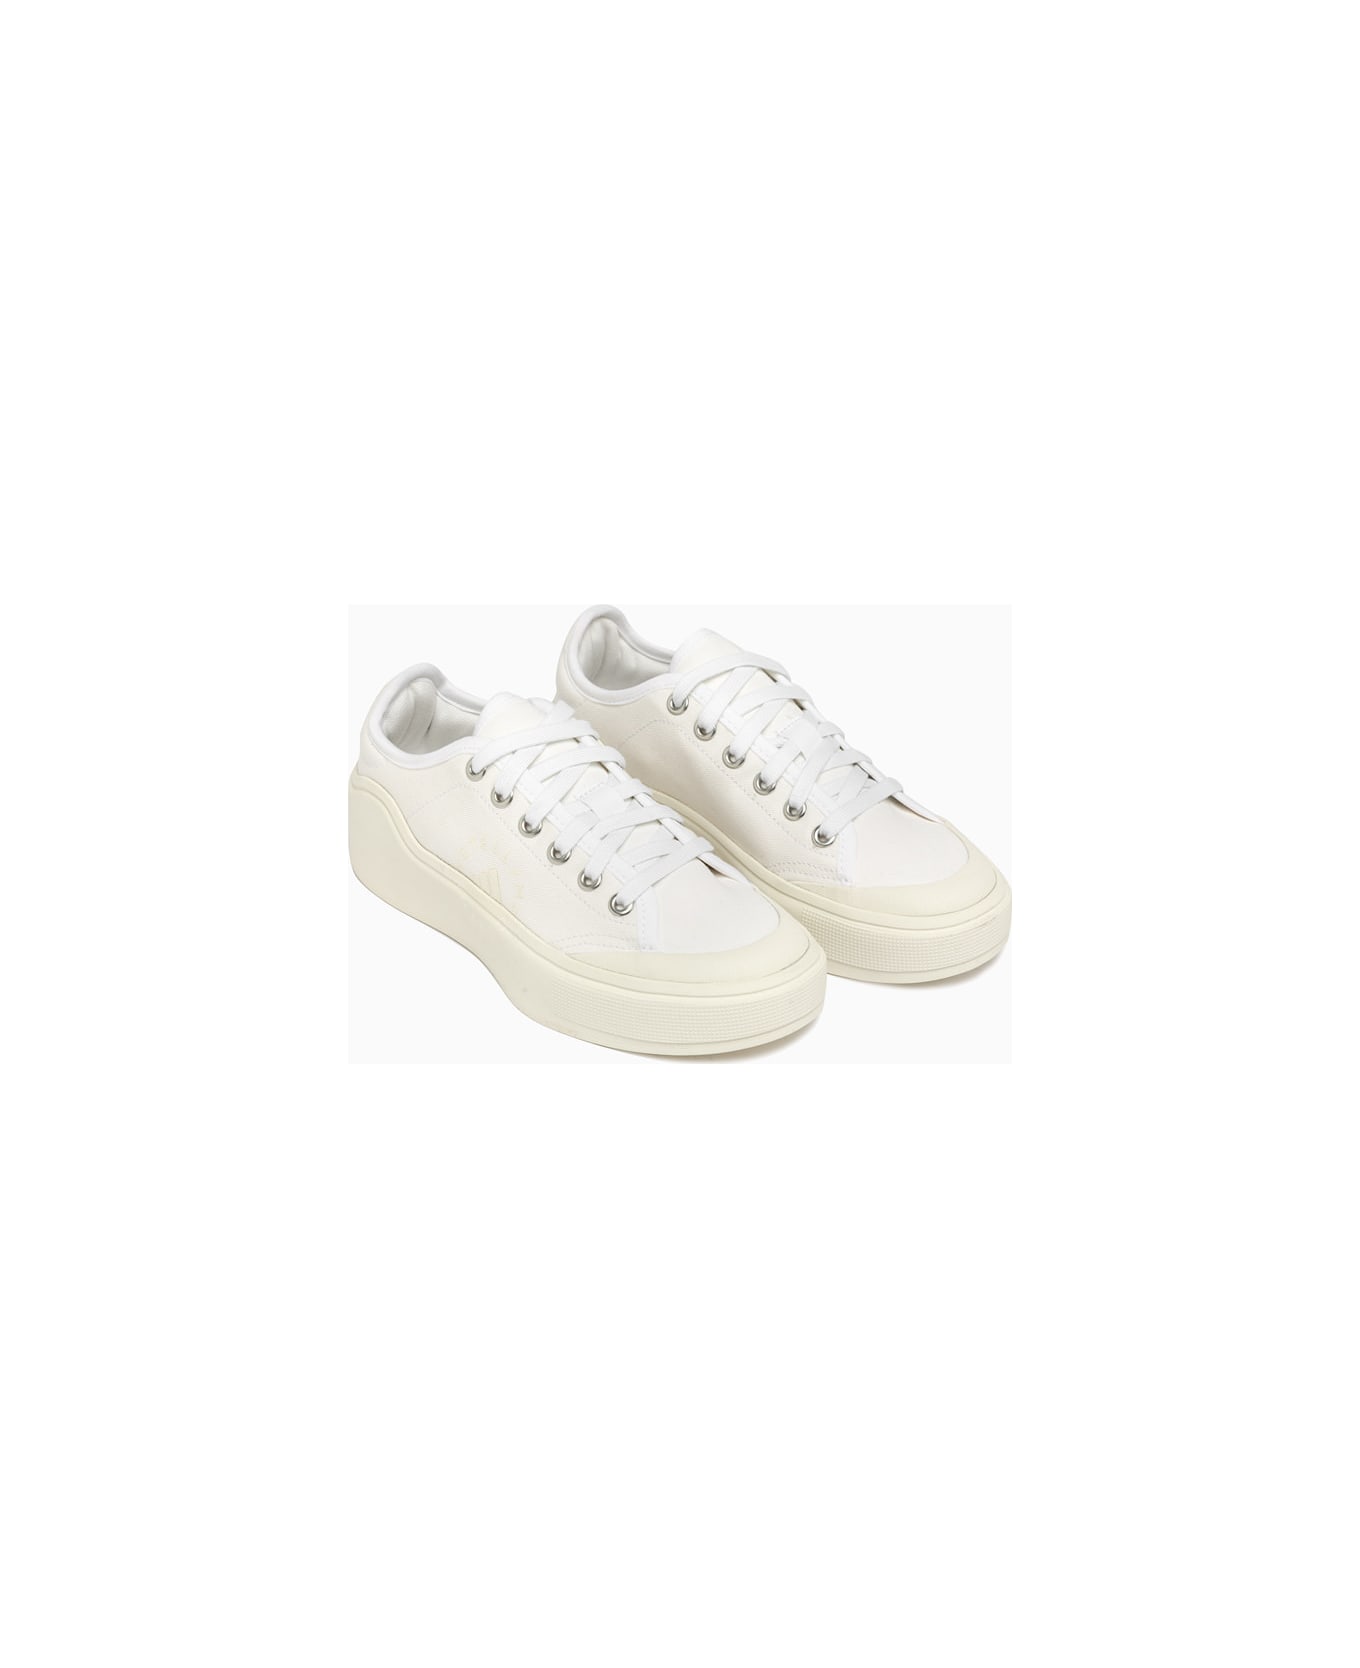 Adidas by Stella McCartney Court Cotton Sneakers Hq8675